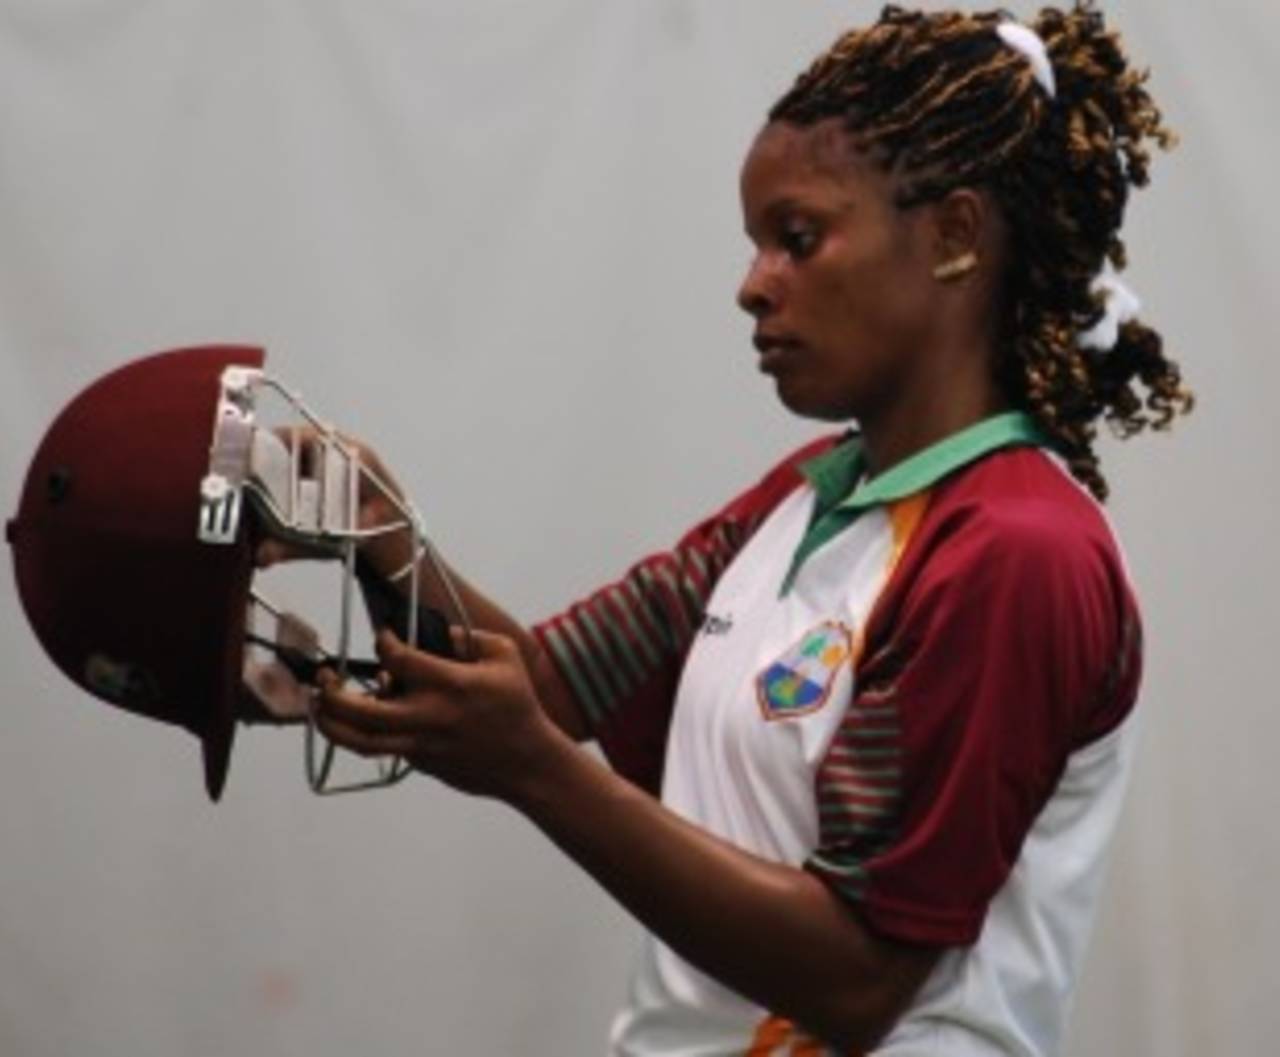 West Indies women's captain Merissa Aguilleira gets ready to bat at a training camp, Barbados, September 26, 2010